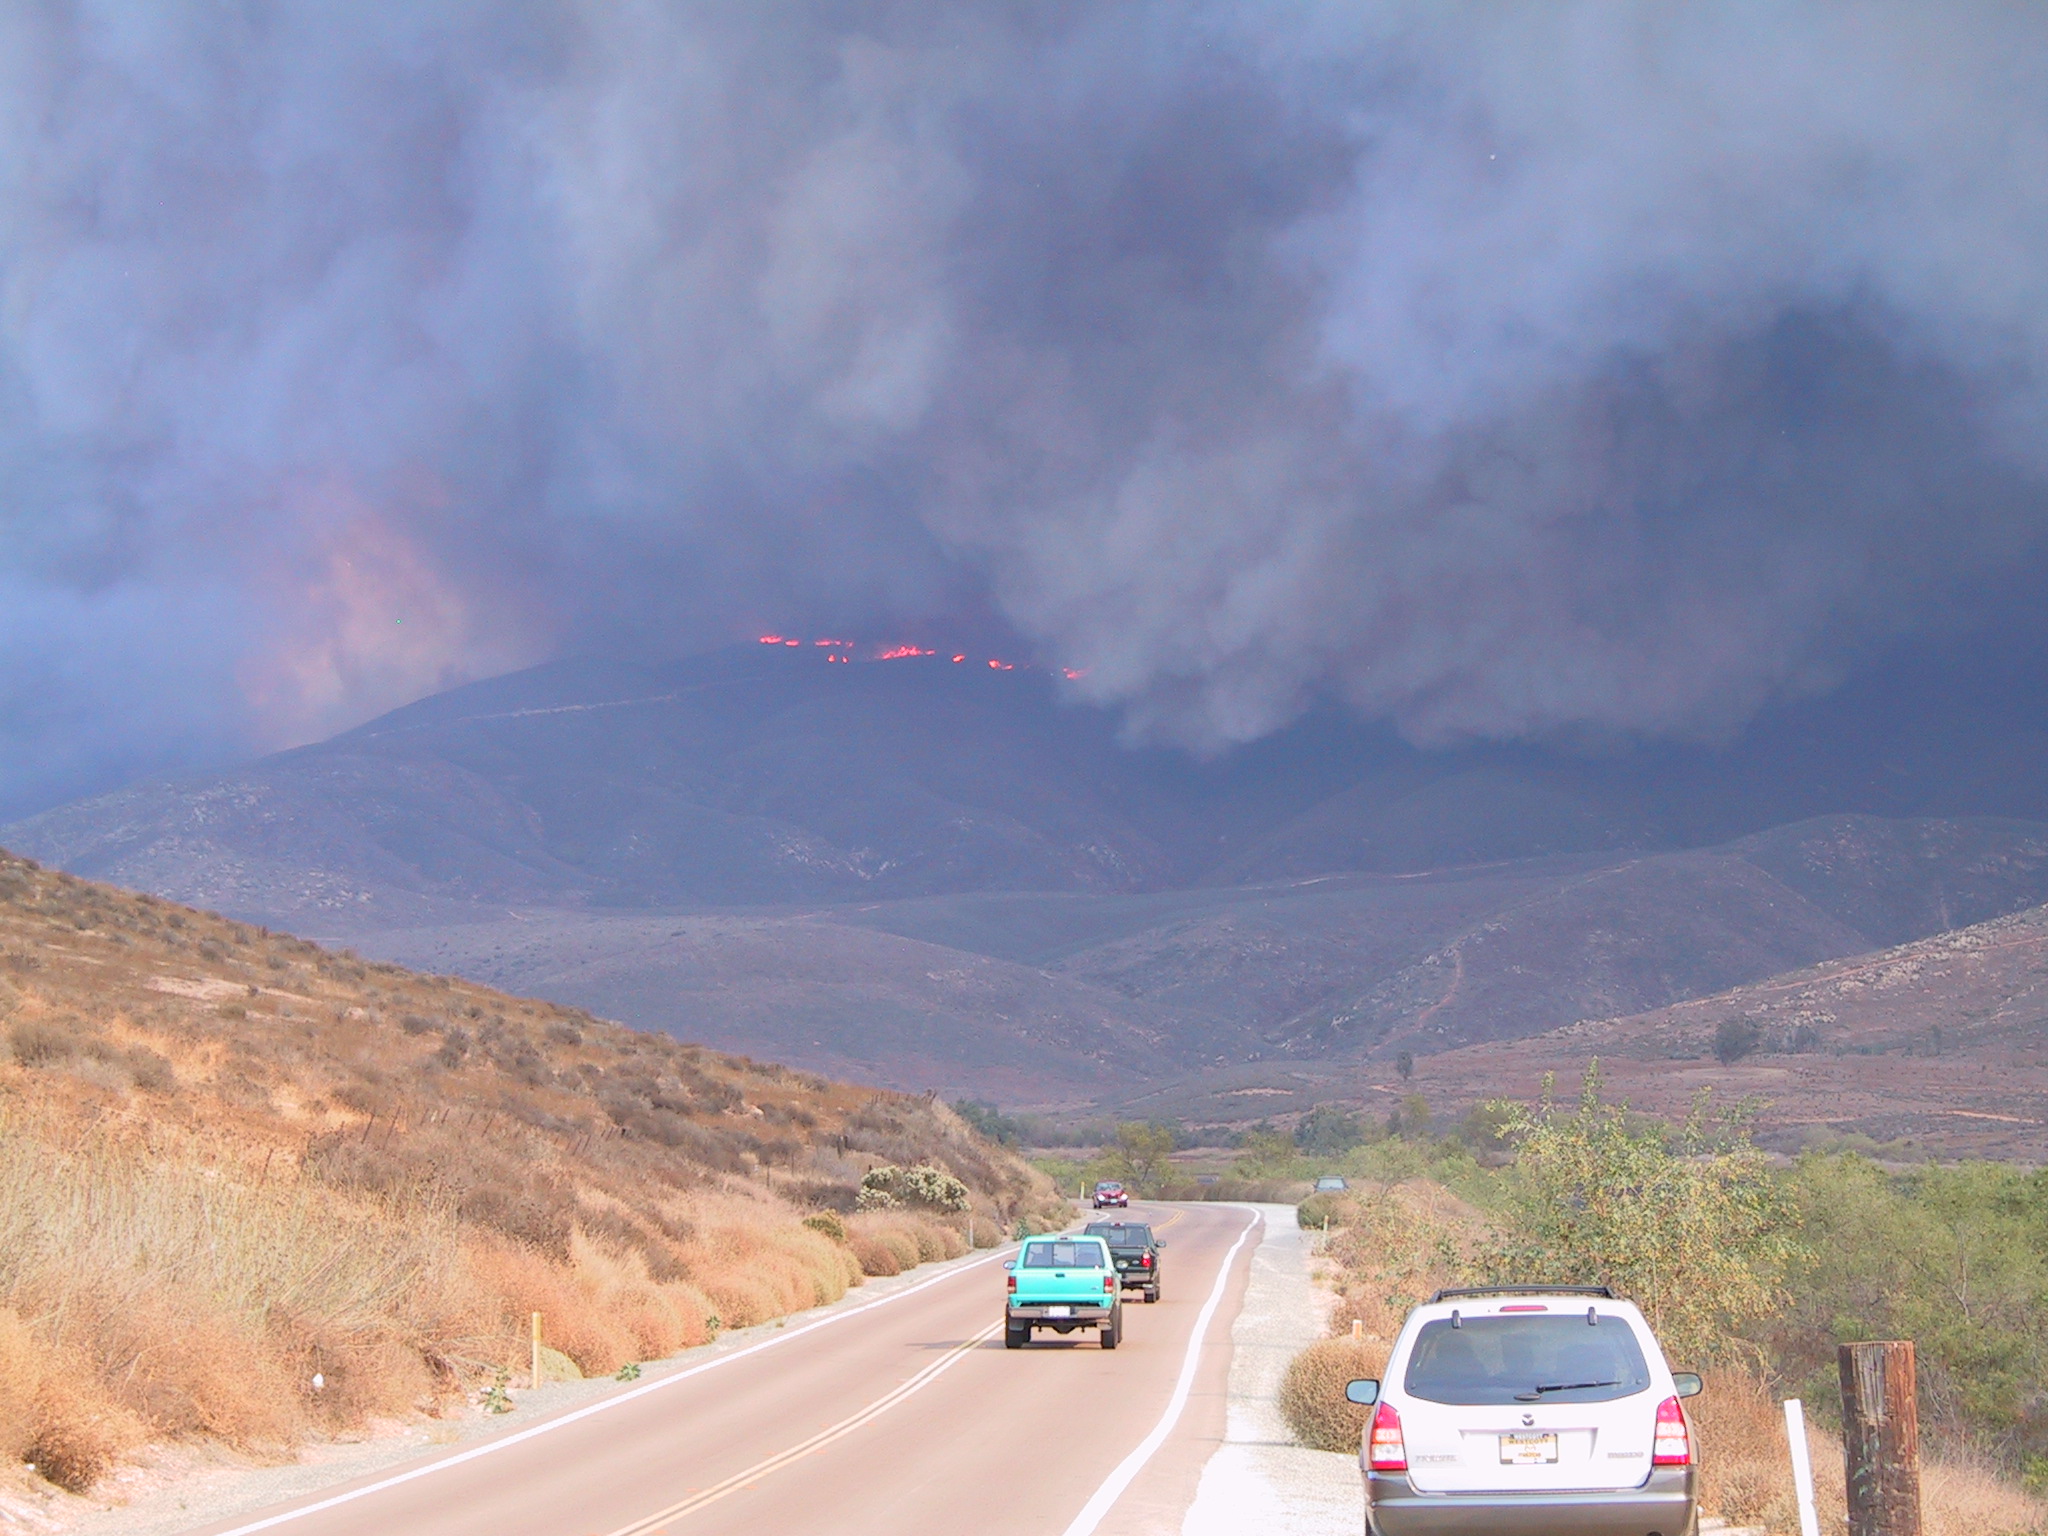 Otay Fire in 2003 on Otay Mountain.<br />Photo by: Robert Fisher, USGS